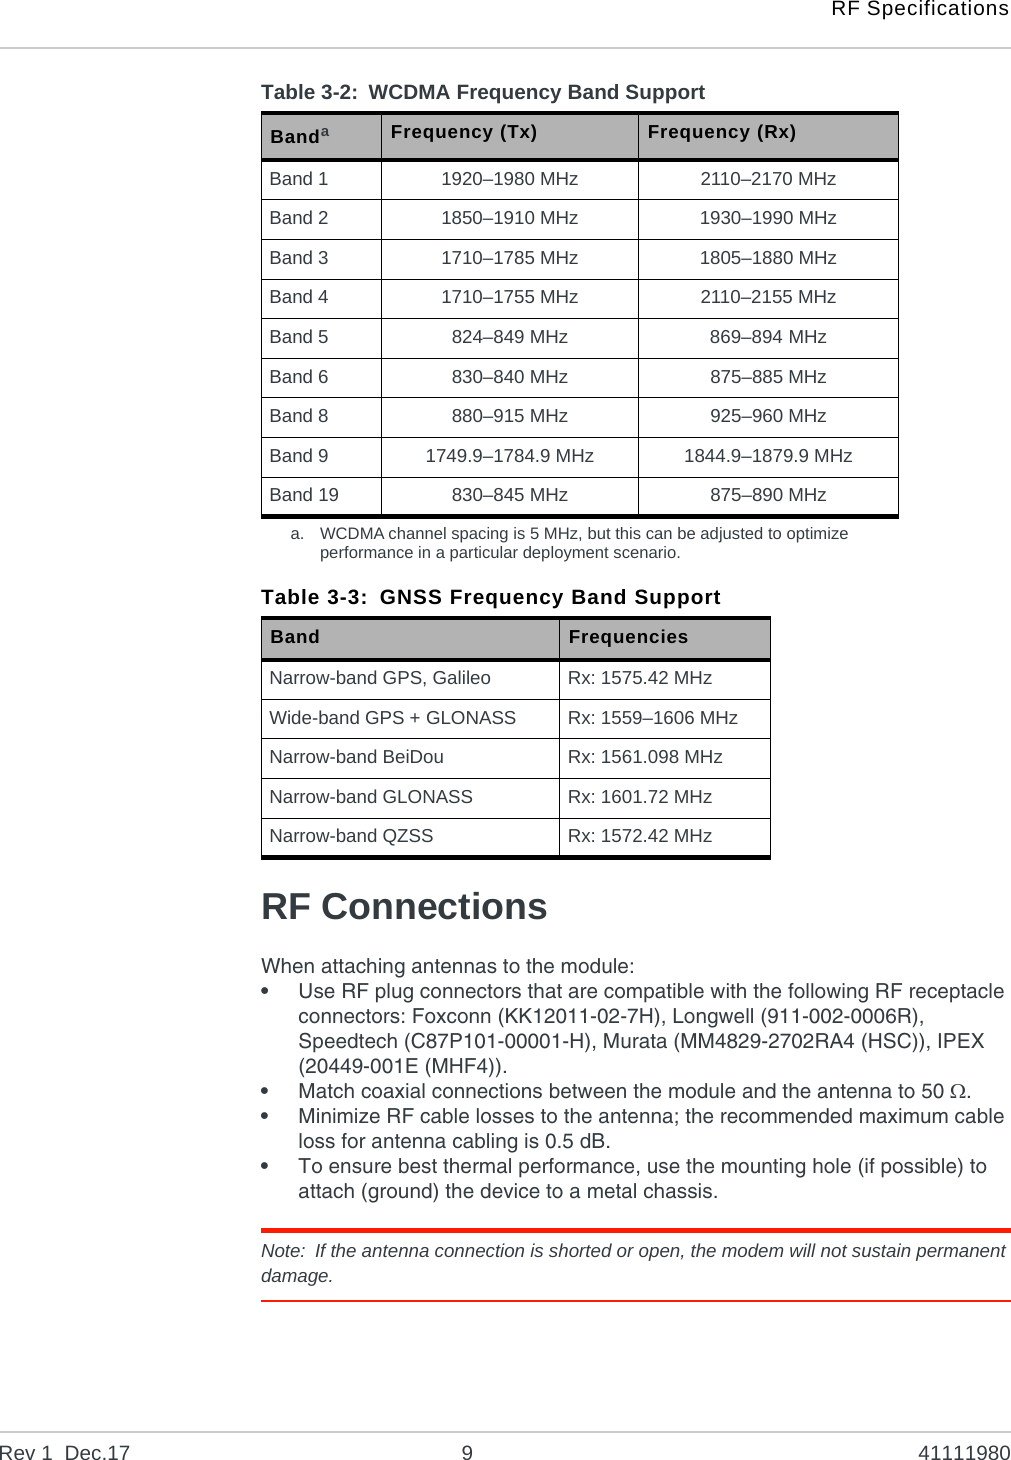 RF SpecificationsRev 1  Dec.17 9 41111980RF ConnectionsWhen attaching antennas to the module:•Use RF plug connectors that are compatible with the following RF receptacle connectors: Foxconn (KK12011-02-7H), Longwell (911-002-0006R), Speedtech (C87P101-00001-H), Murata (MM4829-2702RA4 (HSC)), IPEX (20449-001E (MHF4)).•Match coaxial connections between the module and the antenna to 50 .•Minimize RF cable losses to the antenna; the recommended maximum cable loss for antenna cabling is 0.5 dB.•To ensure best thermal performance, use the mounting hole (if possible) to attach (ground) the device to a metal chassis.Note: If the antenna connection is shorted or open, the modem will not sustain permanent damage.Table 3-2: WCDMA Frequency Band SupportBandaFrequency (Tx) Frequency (Rx)Band 1 1920–1980 MHz 2110–2170 MHzBand 2 1850–1910 MHz 1930–1990 MHzBand 3 1710–1785 MHz 1805–1880 MHzBand 4 1710–1755 MHz 2110–2155 MHzBand 5 824–849 MHz 869–894 MHzBand 6 830–840 MHz 875–885 MHzBand 8 880–915 MHz 925–960 MHzBand 9 1749.9–1784.9 MHz 1844.9–1879.9 MHzBand 19 830–845 MHz 875–890 MHza. WCDMA channel spacing is 5 MHz, but this can be adjusted to optimize performance in a particular deployment scenario.Table 3-3: GNSS Frequency Band SupportBand FrequenciesNarrow-band GPS, Galileo Rx: 1575.42 MHzWide-band GPS + GLONASS Rx: 1559–1606 MHzNarrow-band BeiDou Rx: 1561.098 MHzNarrow-band GLONASS Rx: 1601.72 MHzNarrow-band QZSS Rx: 1572.42 MHz